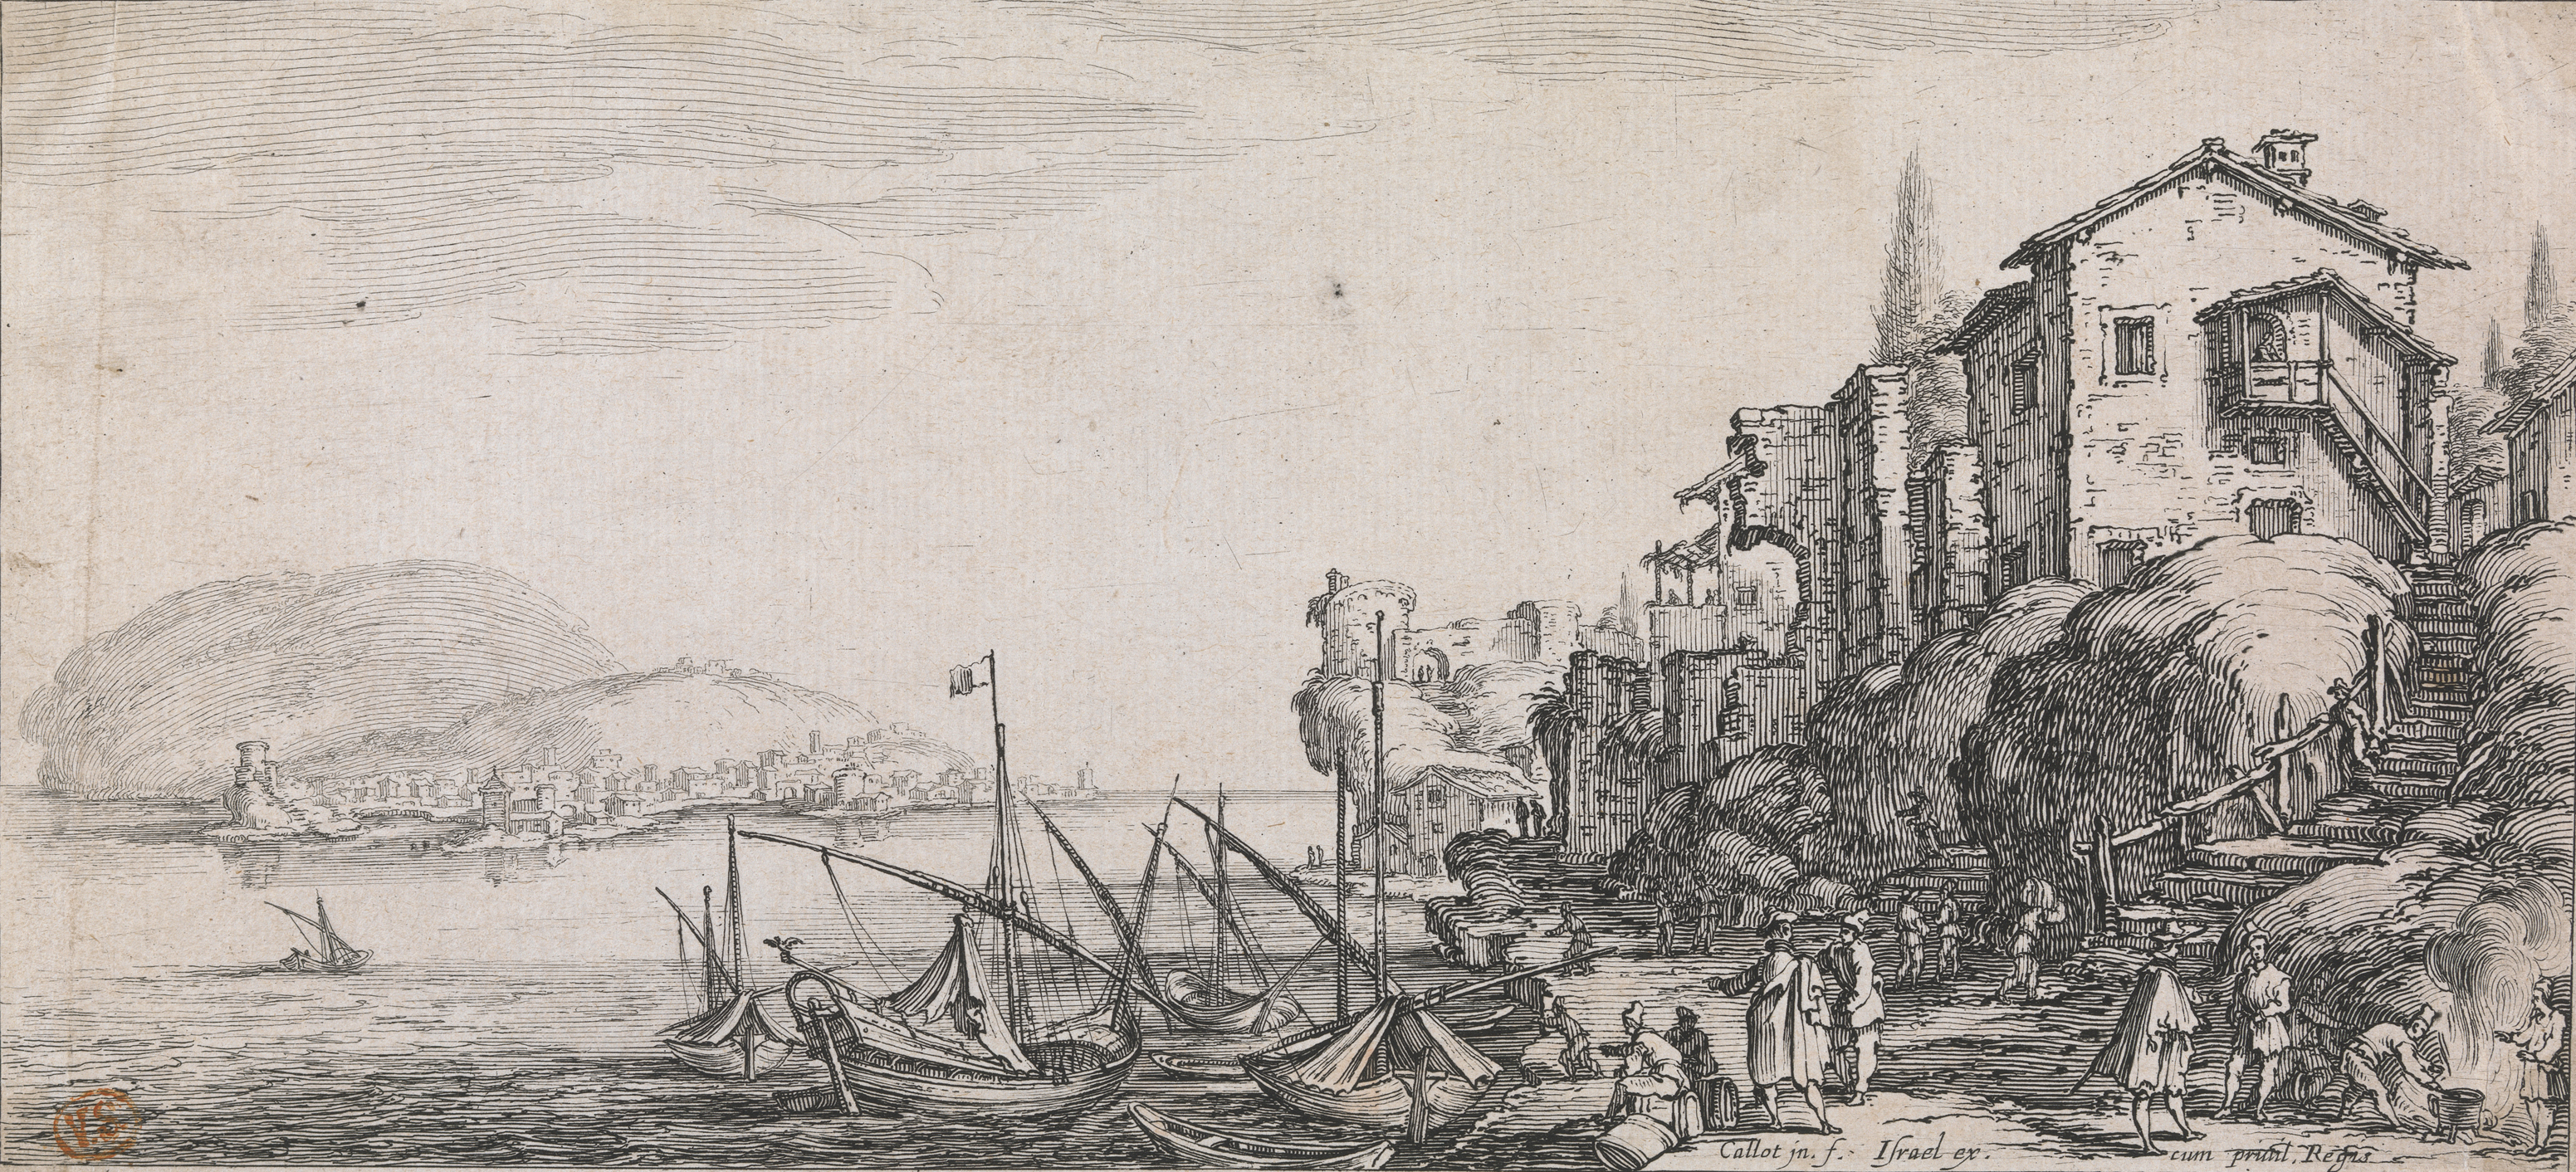 Jacques Callot, Kleine haven, 1630, Musea Brugge, 114 mm x 248 mm, inv. 0000.GRO6217.III, CC0, image artinflanders.be